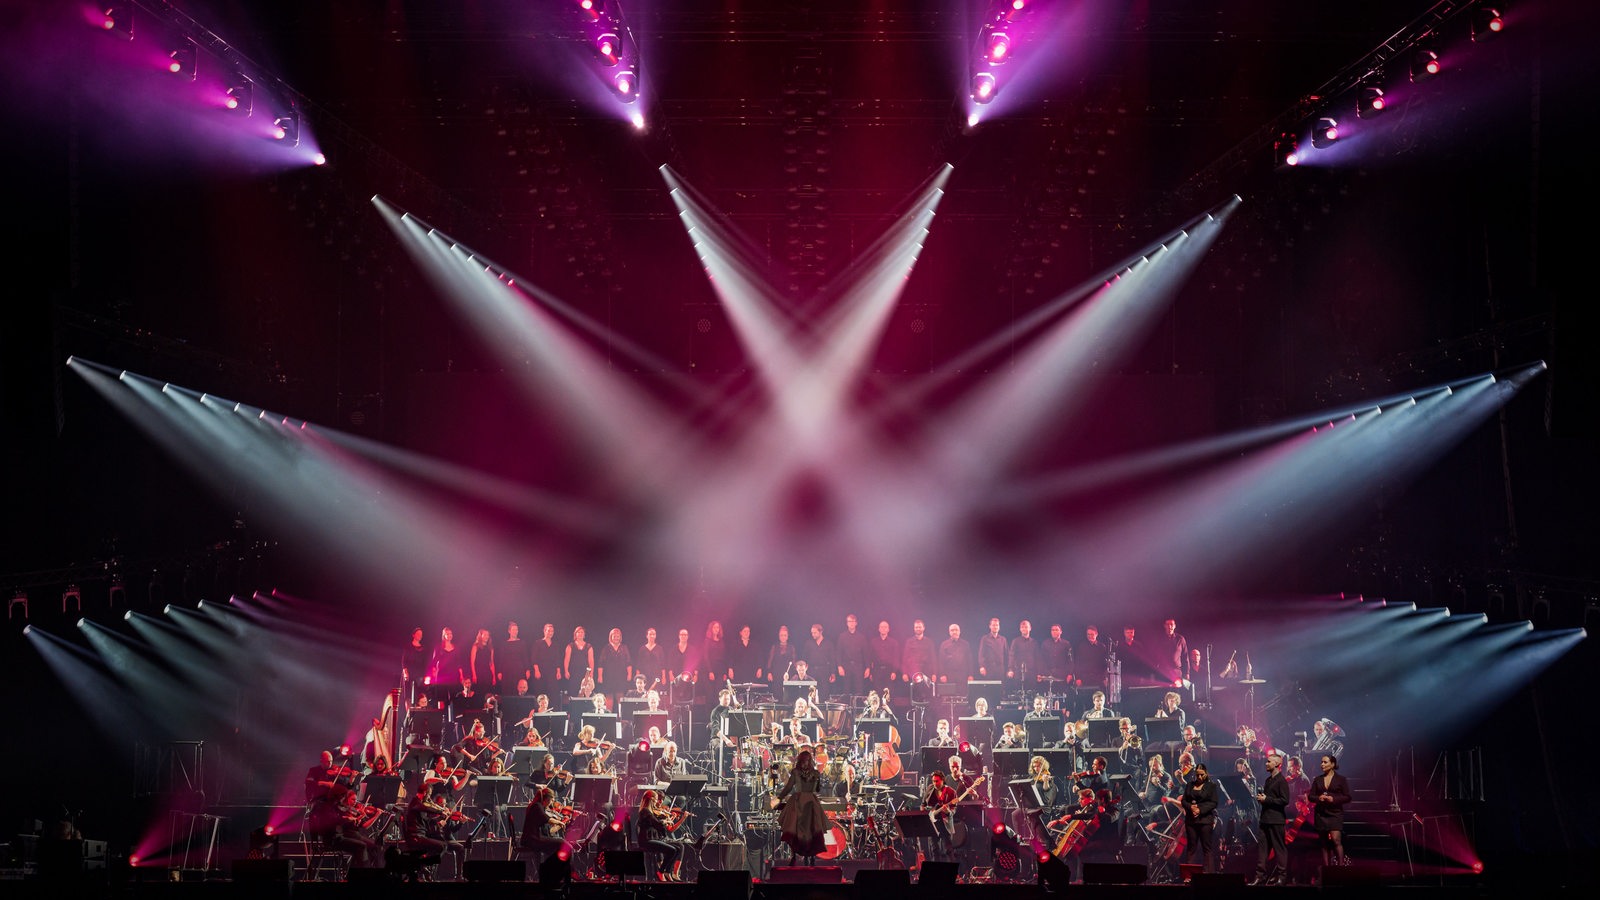 Antwerp Philhamronic Orchestra